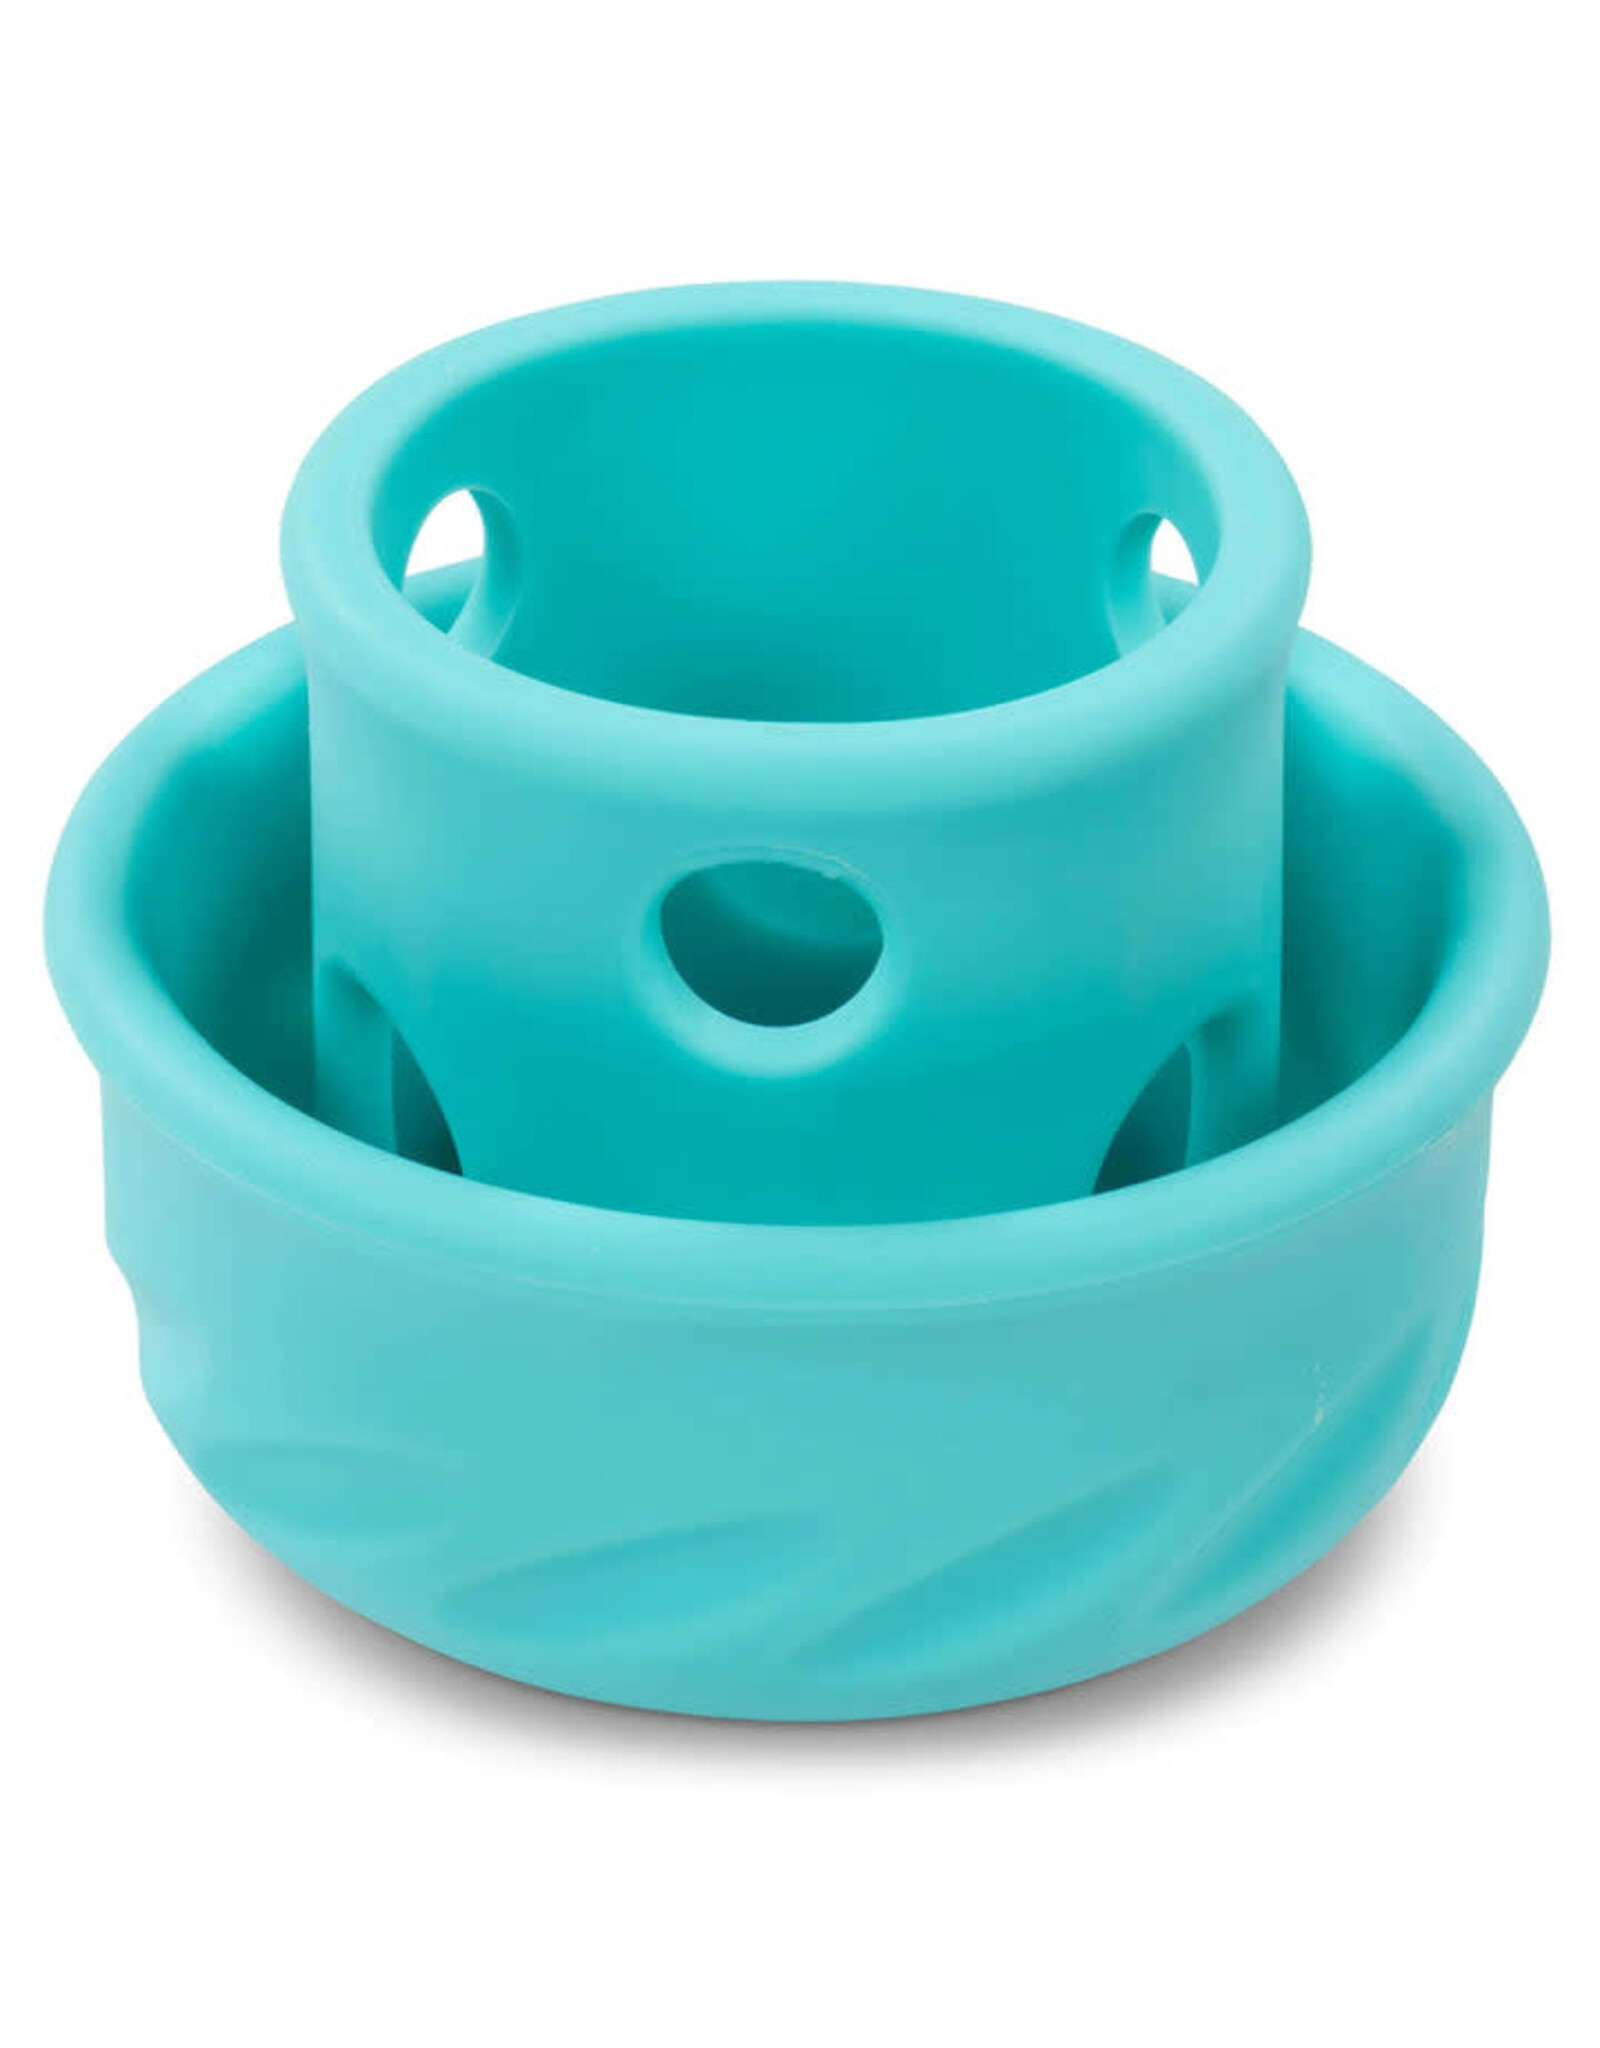 MESSY MUTTS MESSY MUTTS  PUZZLE N PLAY MUSHROOM FEEDER TEAL SM